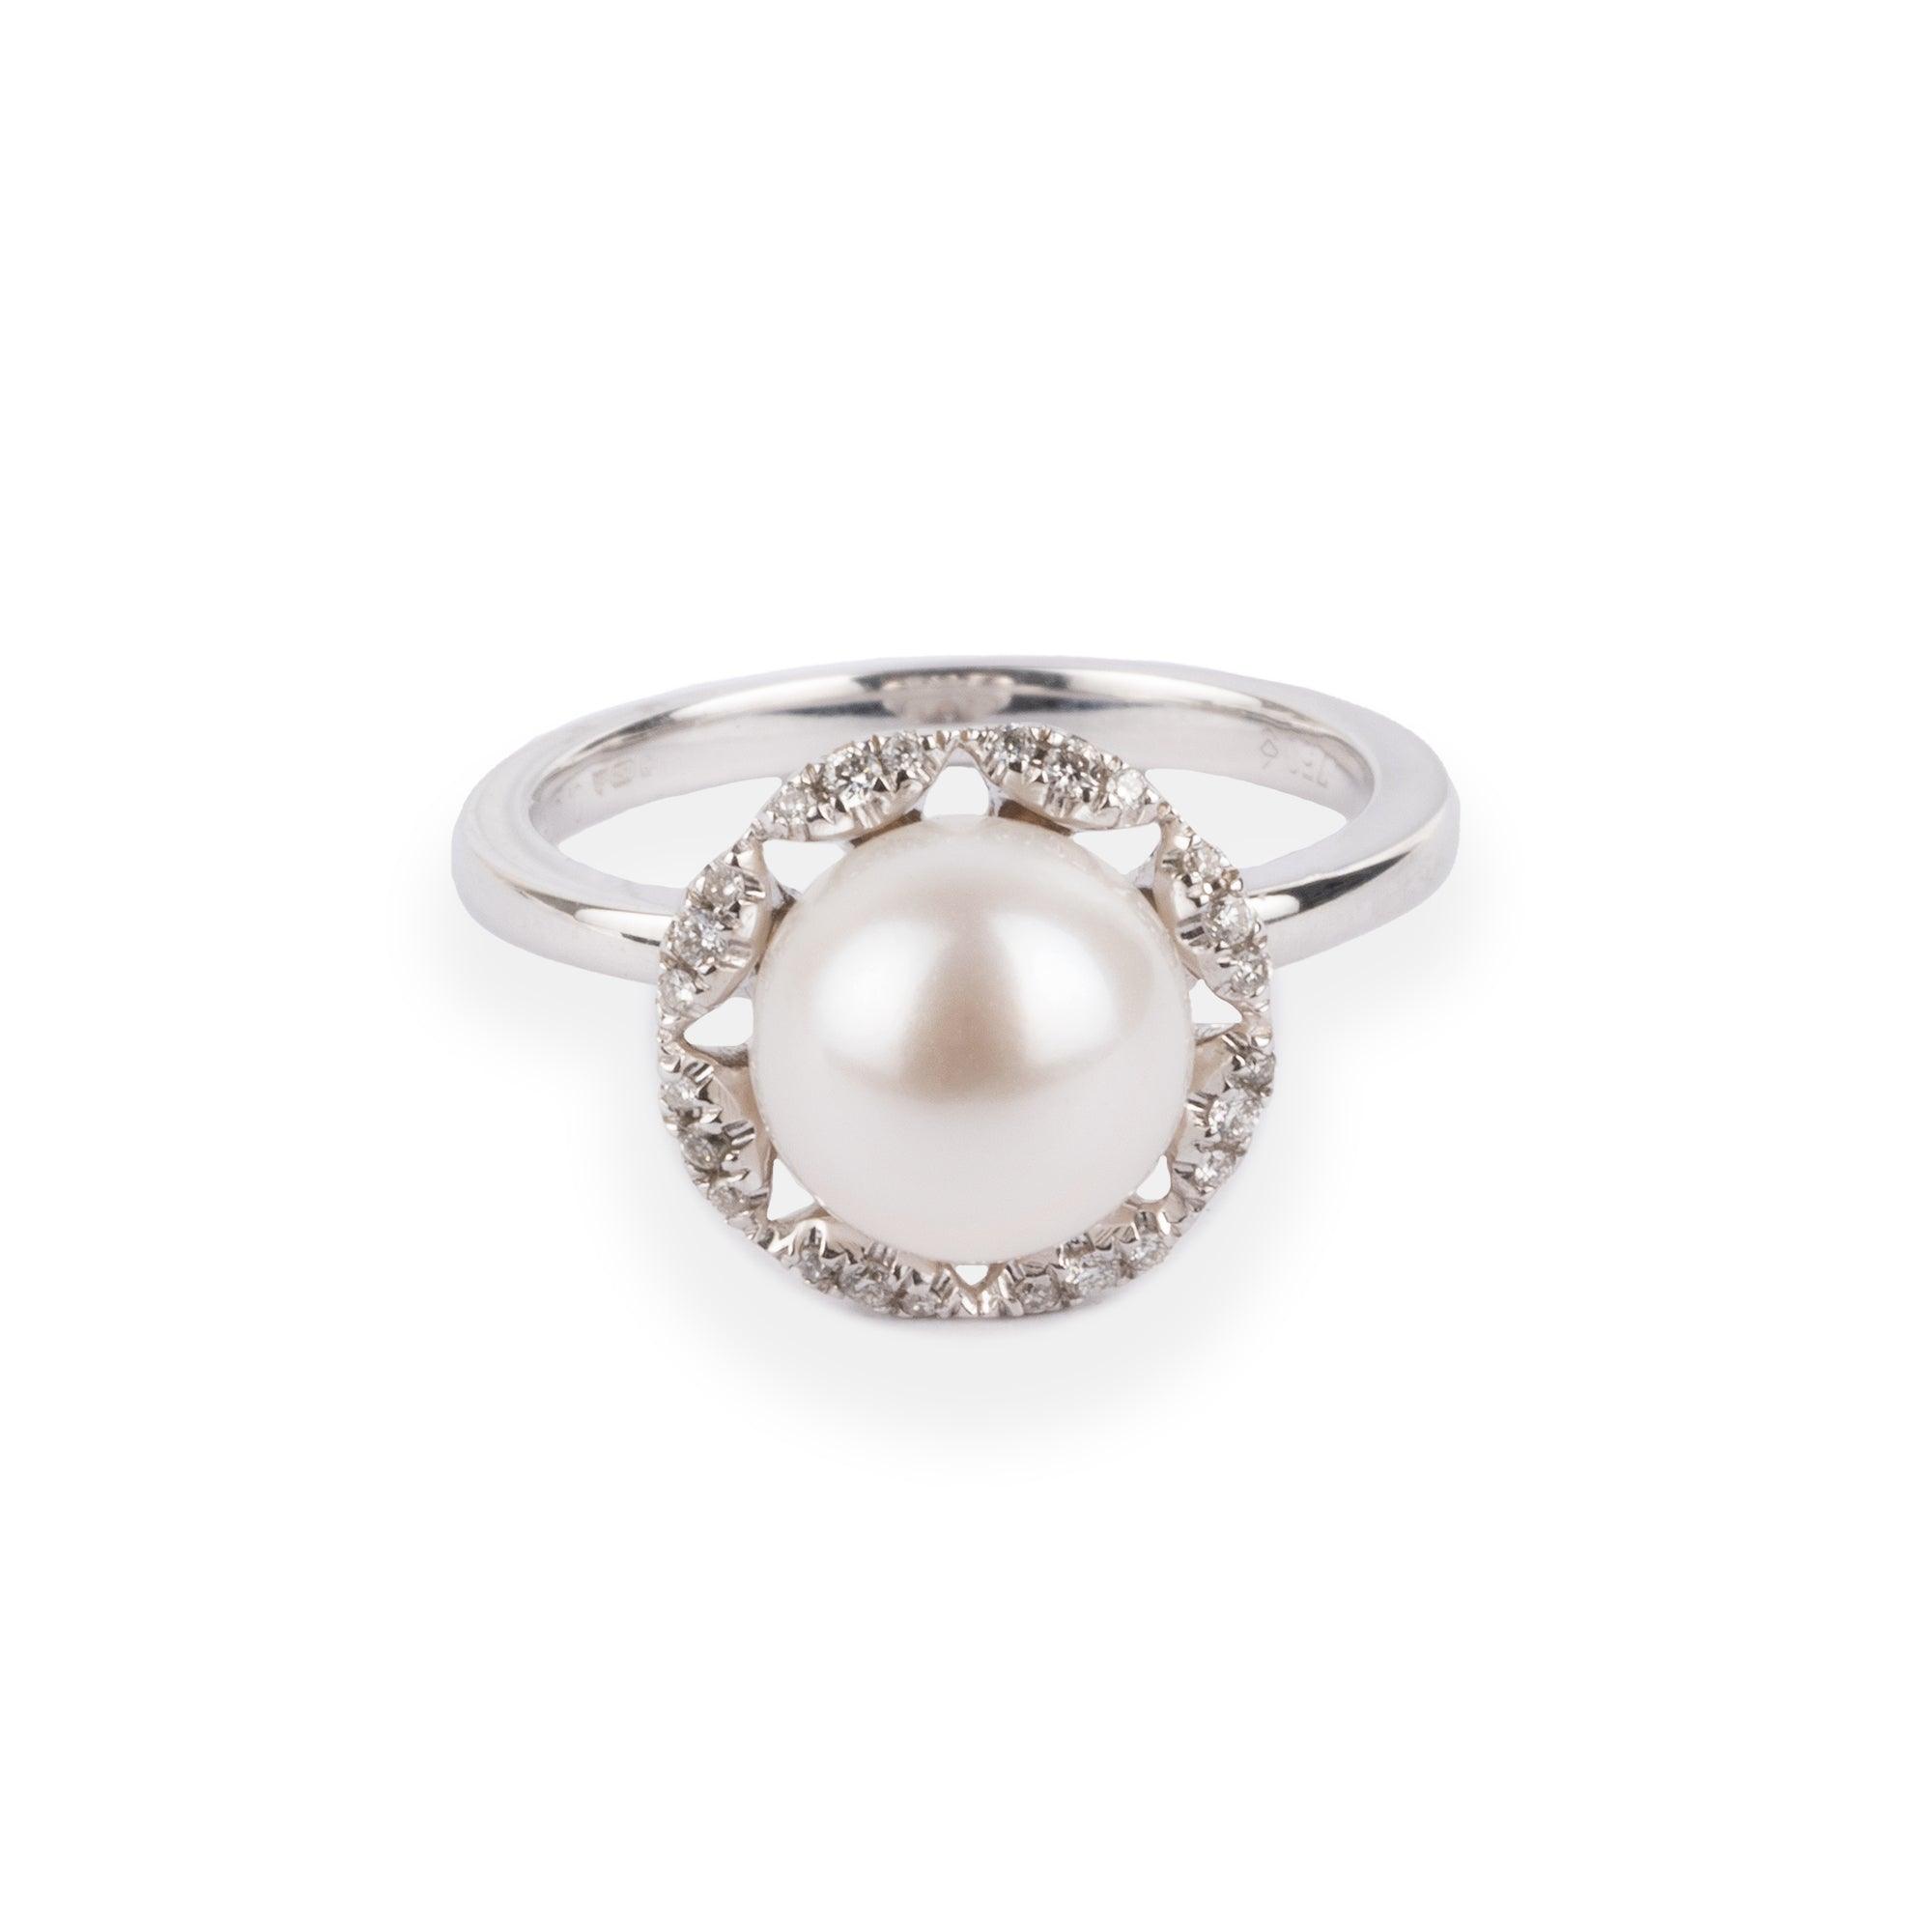 18ct White Gold Diamond & Cultured Pearl Dress Ring A-R41161-3002